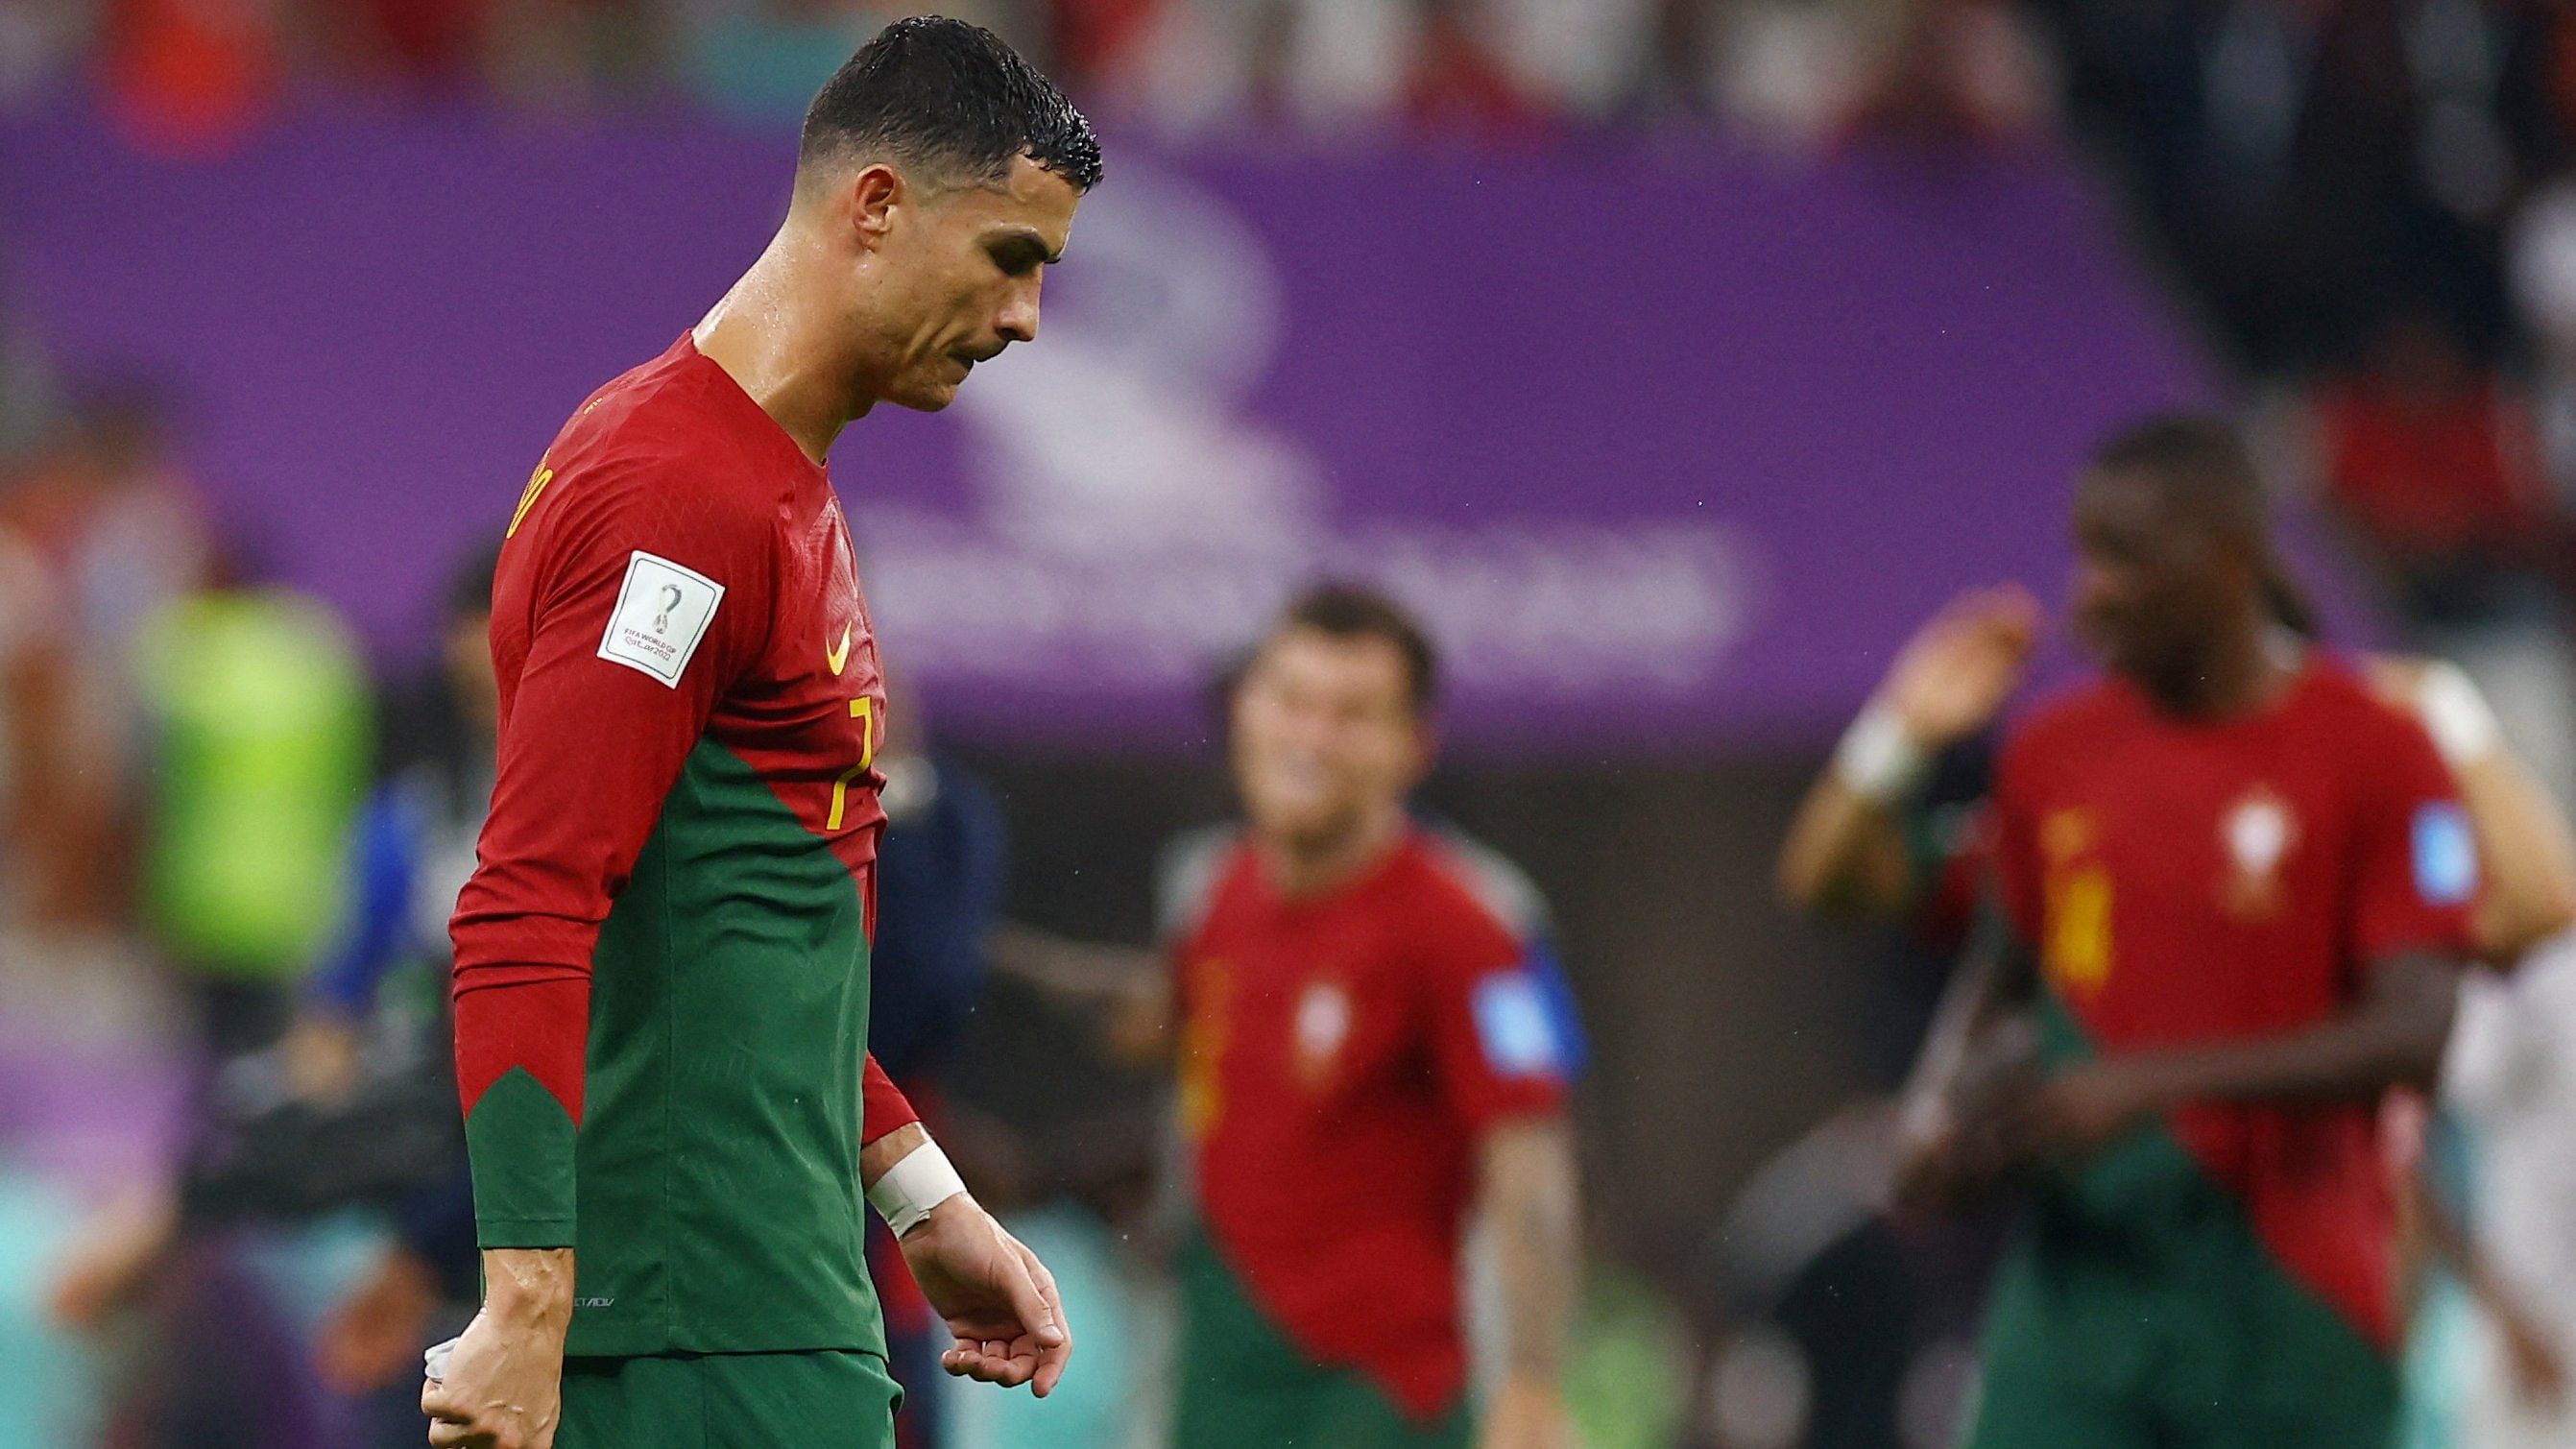 Portugal's Cristiano Ronaldo after qualifying for the quarter finals. Credit: Reuters Photo